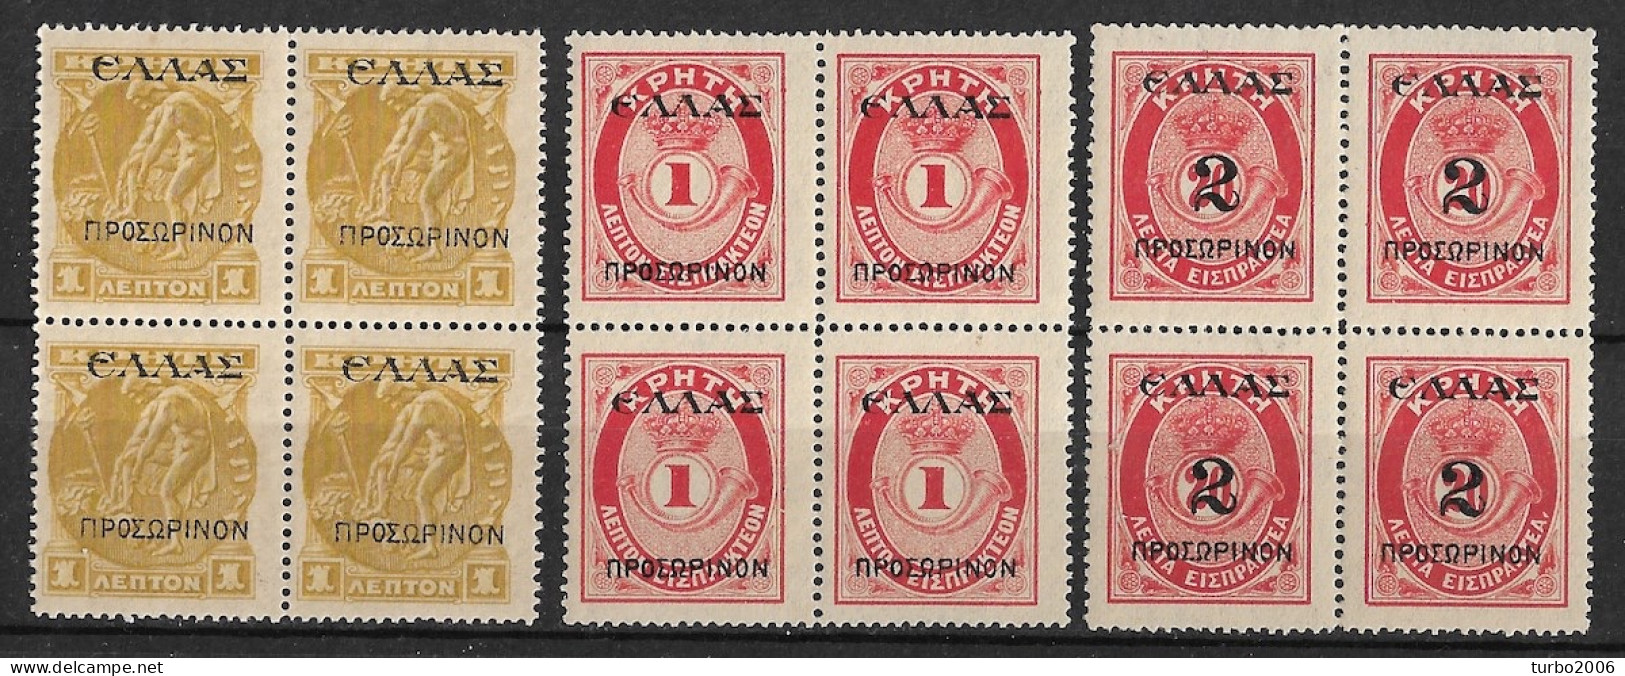 CRETE 1909 Overprinted Stamps With ELLAS + Provisional 3 Values From The Set Vl. 63-64-66 In B4 MH/MNH - Kreta